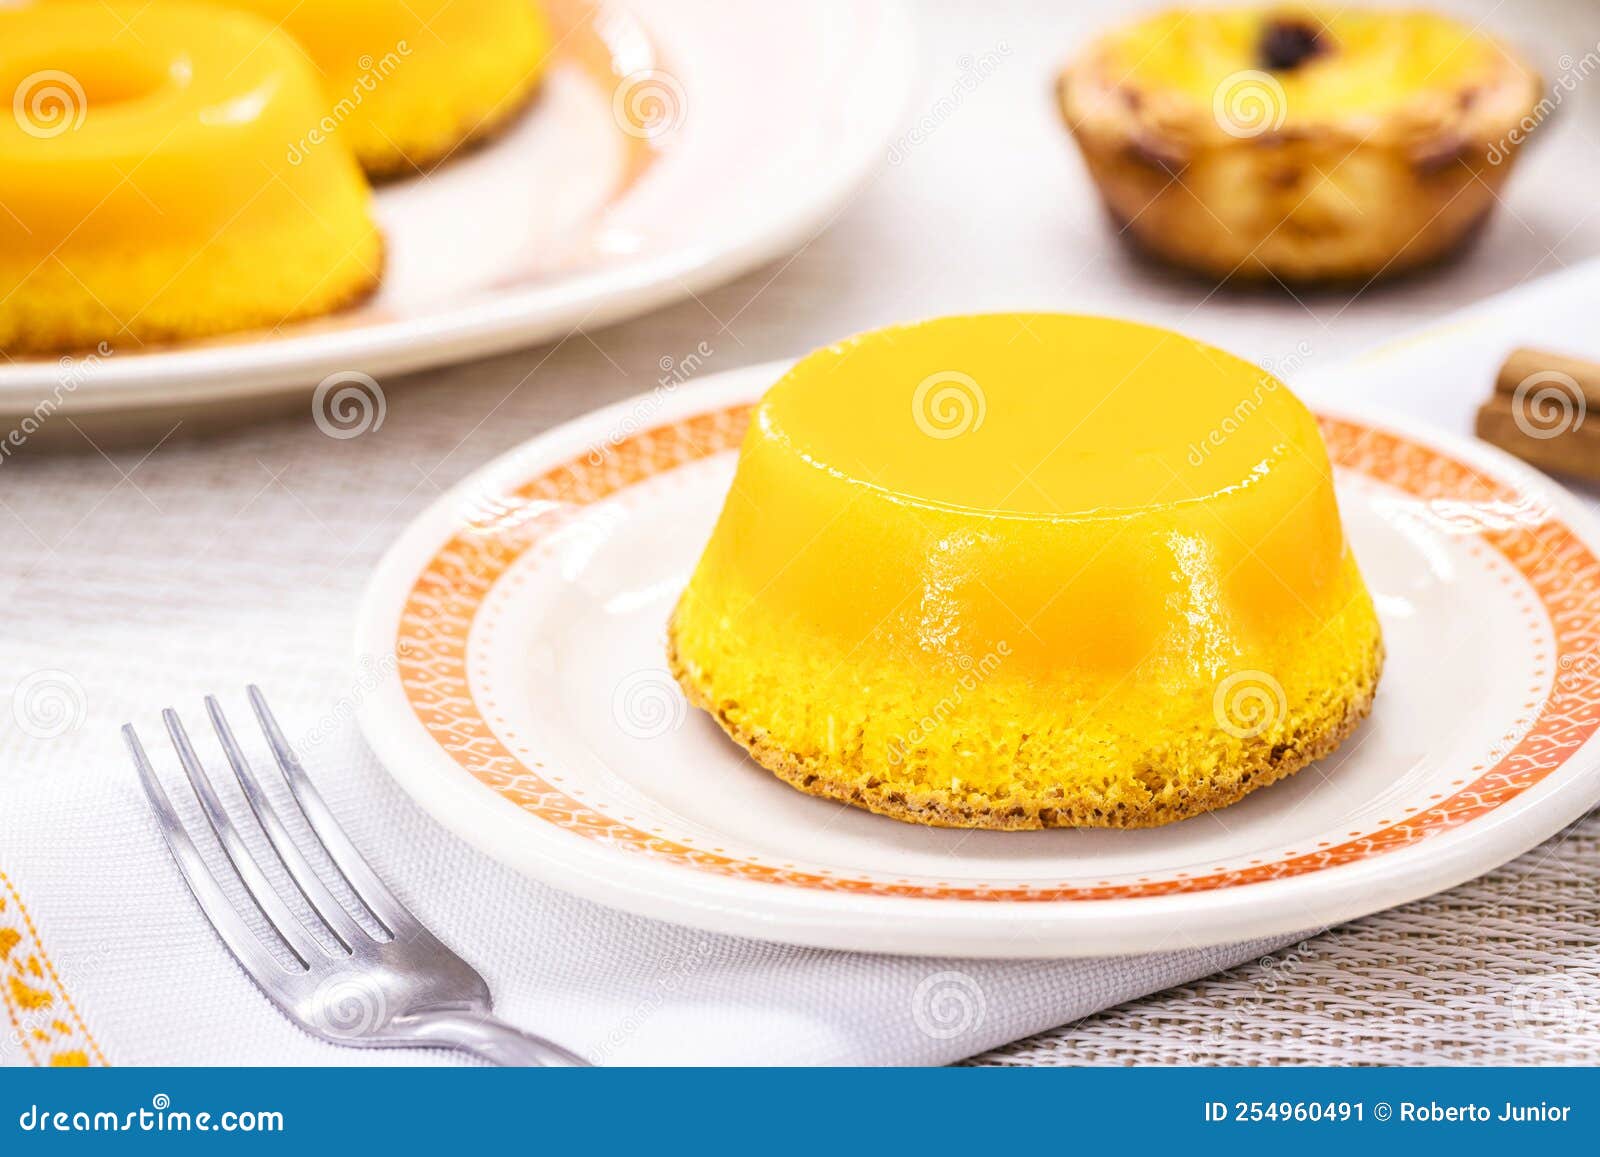 typical delicacy from brazil and portugal, sweet called brisa do lis or quindim, made with eggs